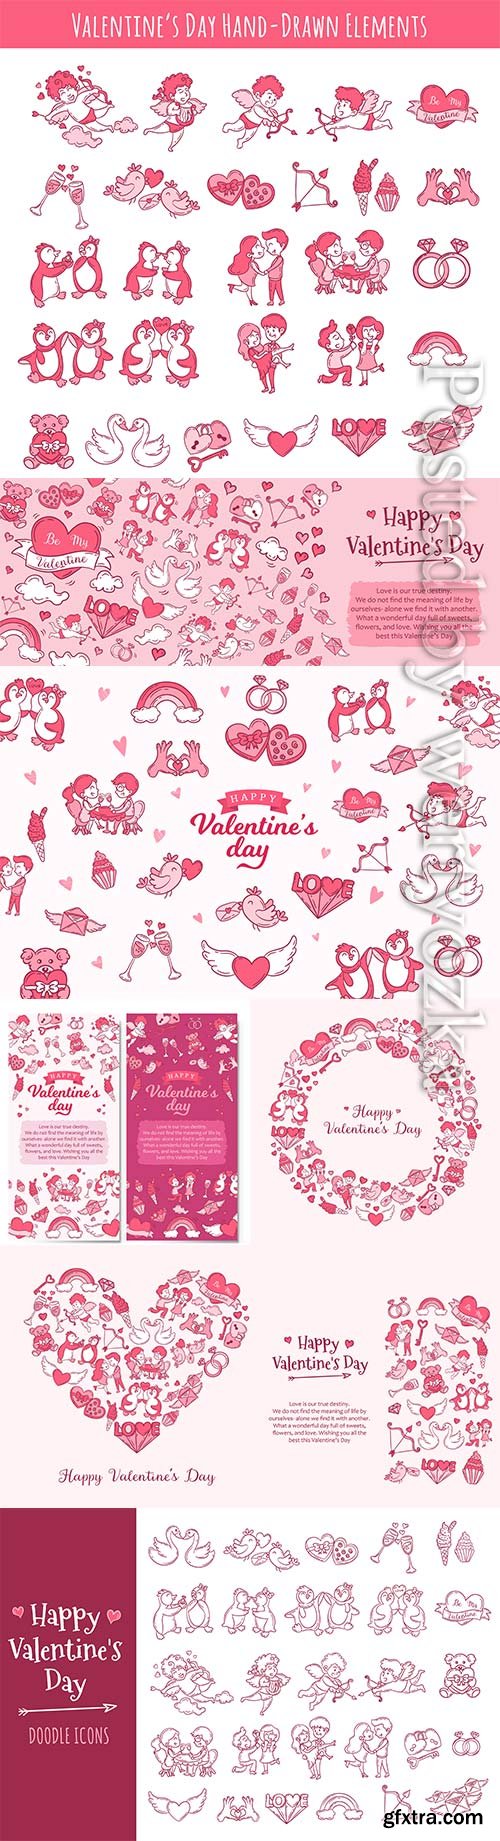 Valentine's day greeting card with doodle icons and text